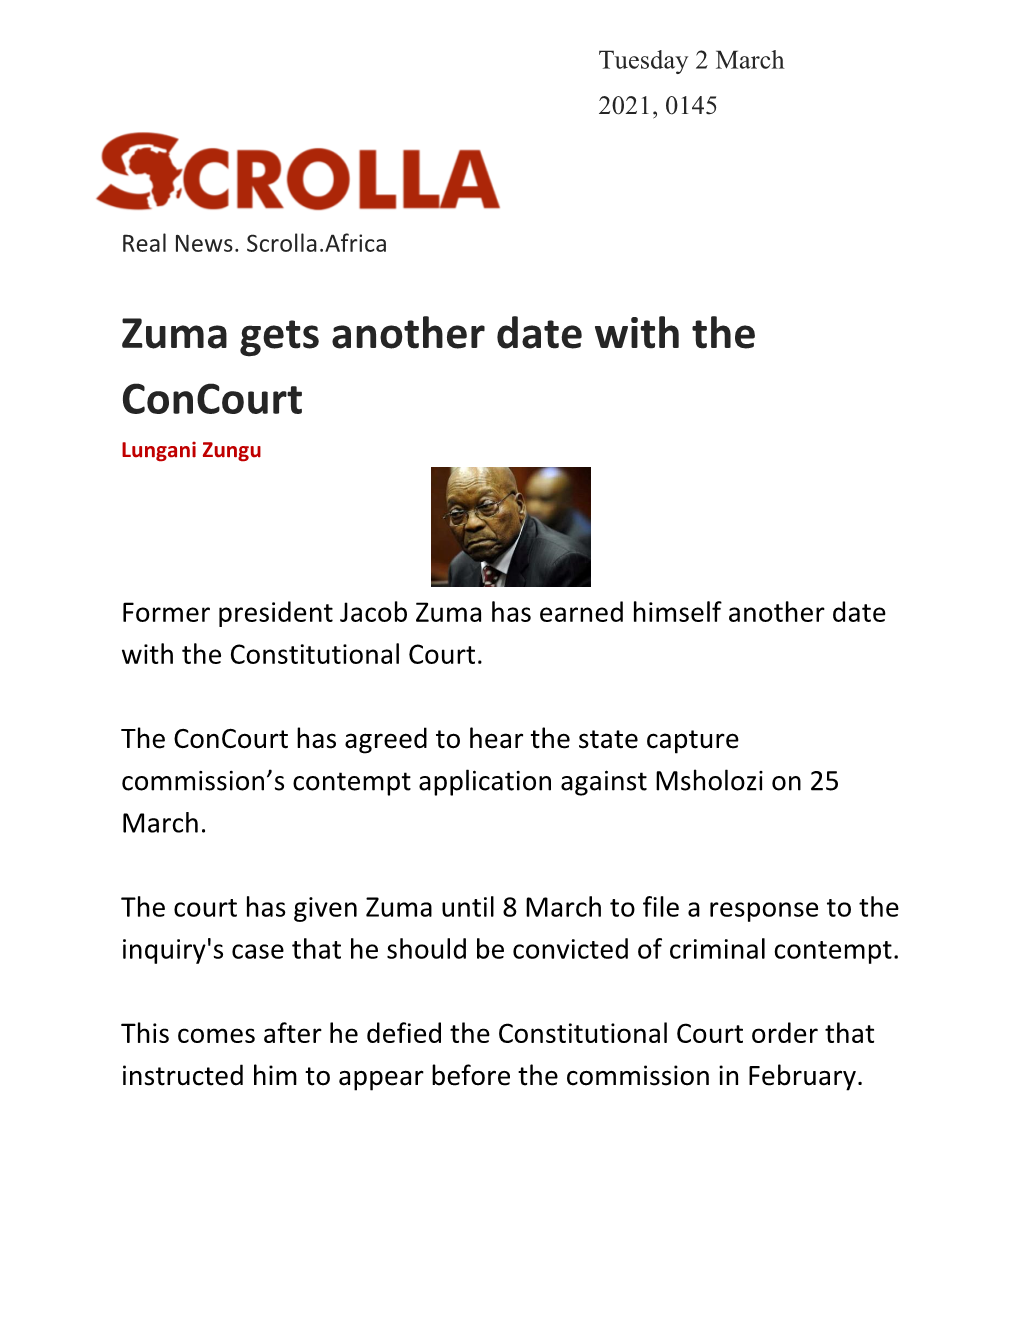 Zuma Gets Another Date with the Concourt Lungani Zungu